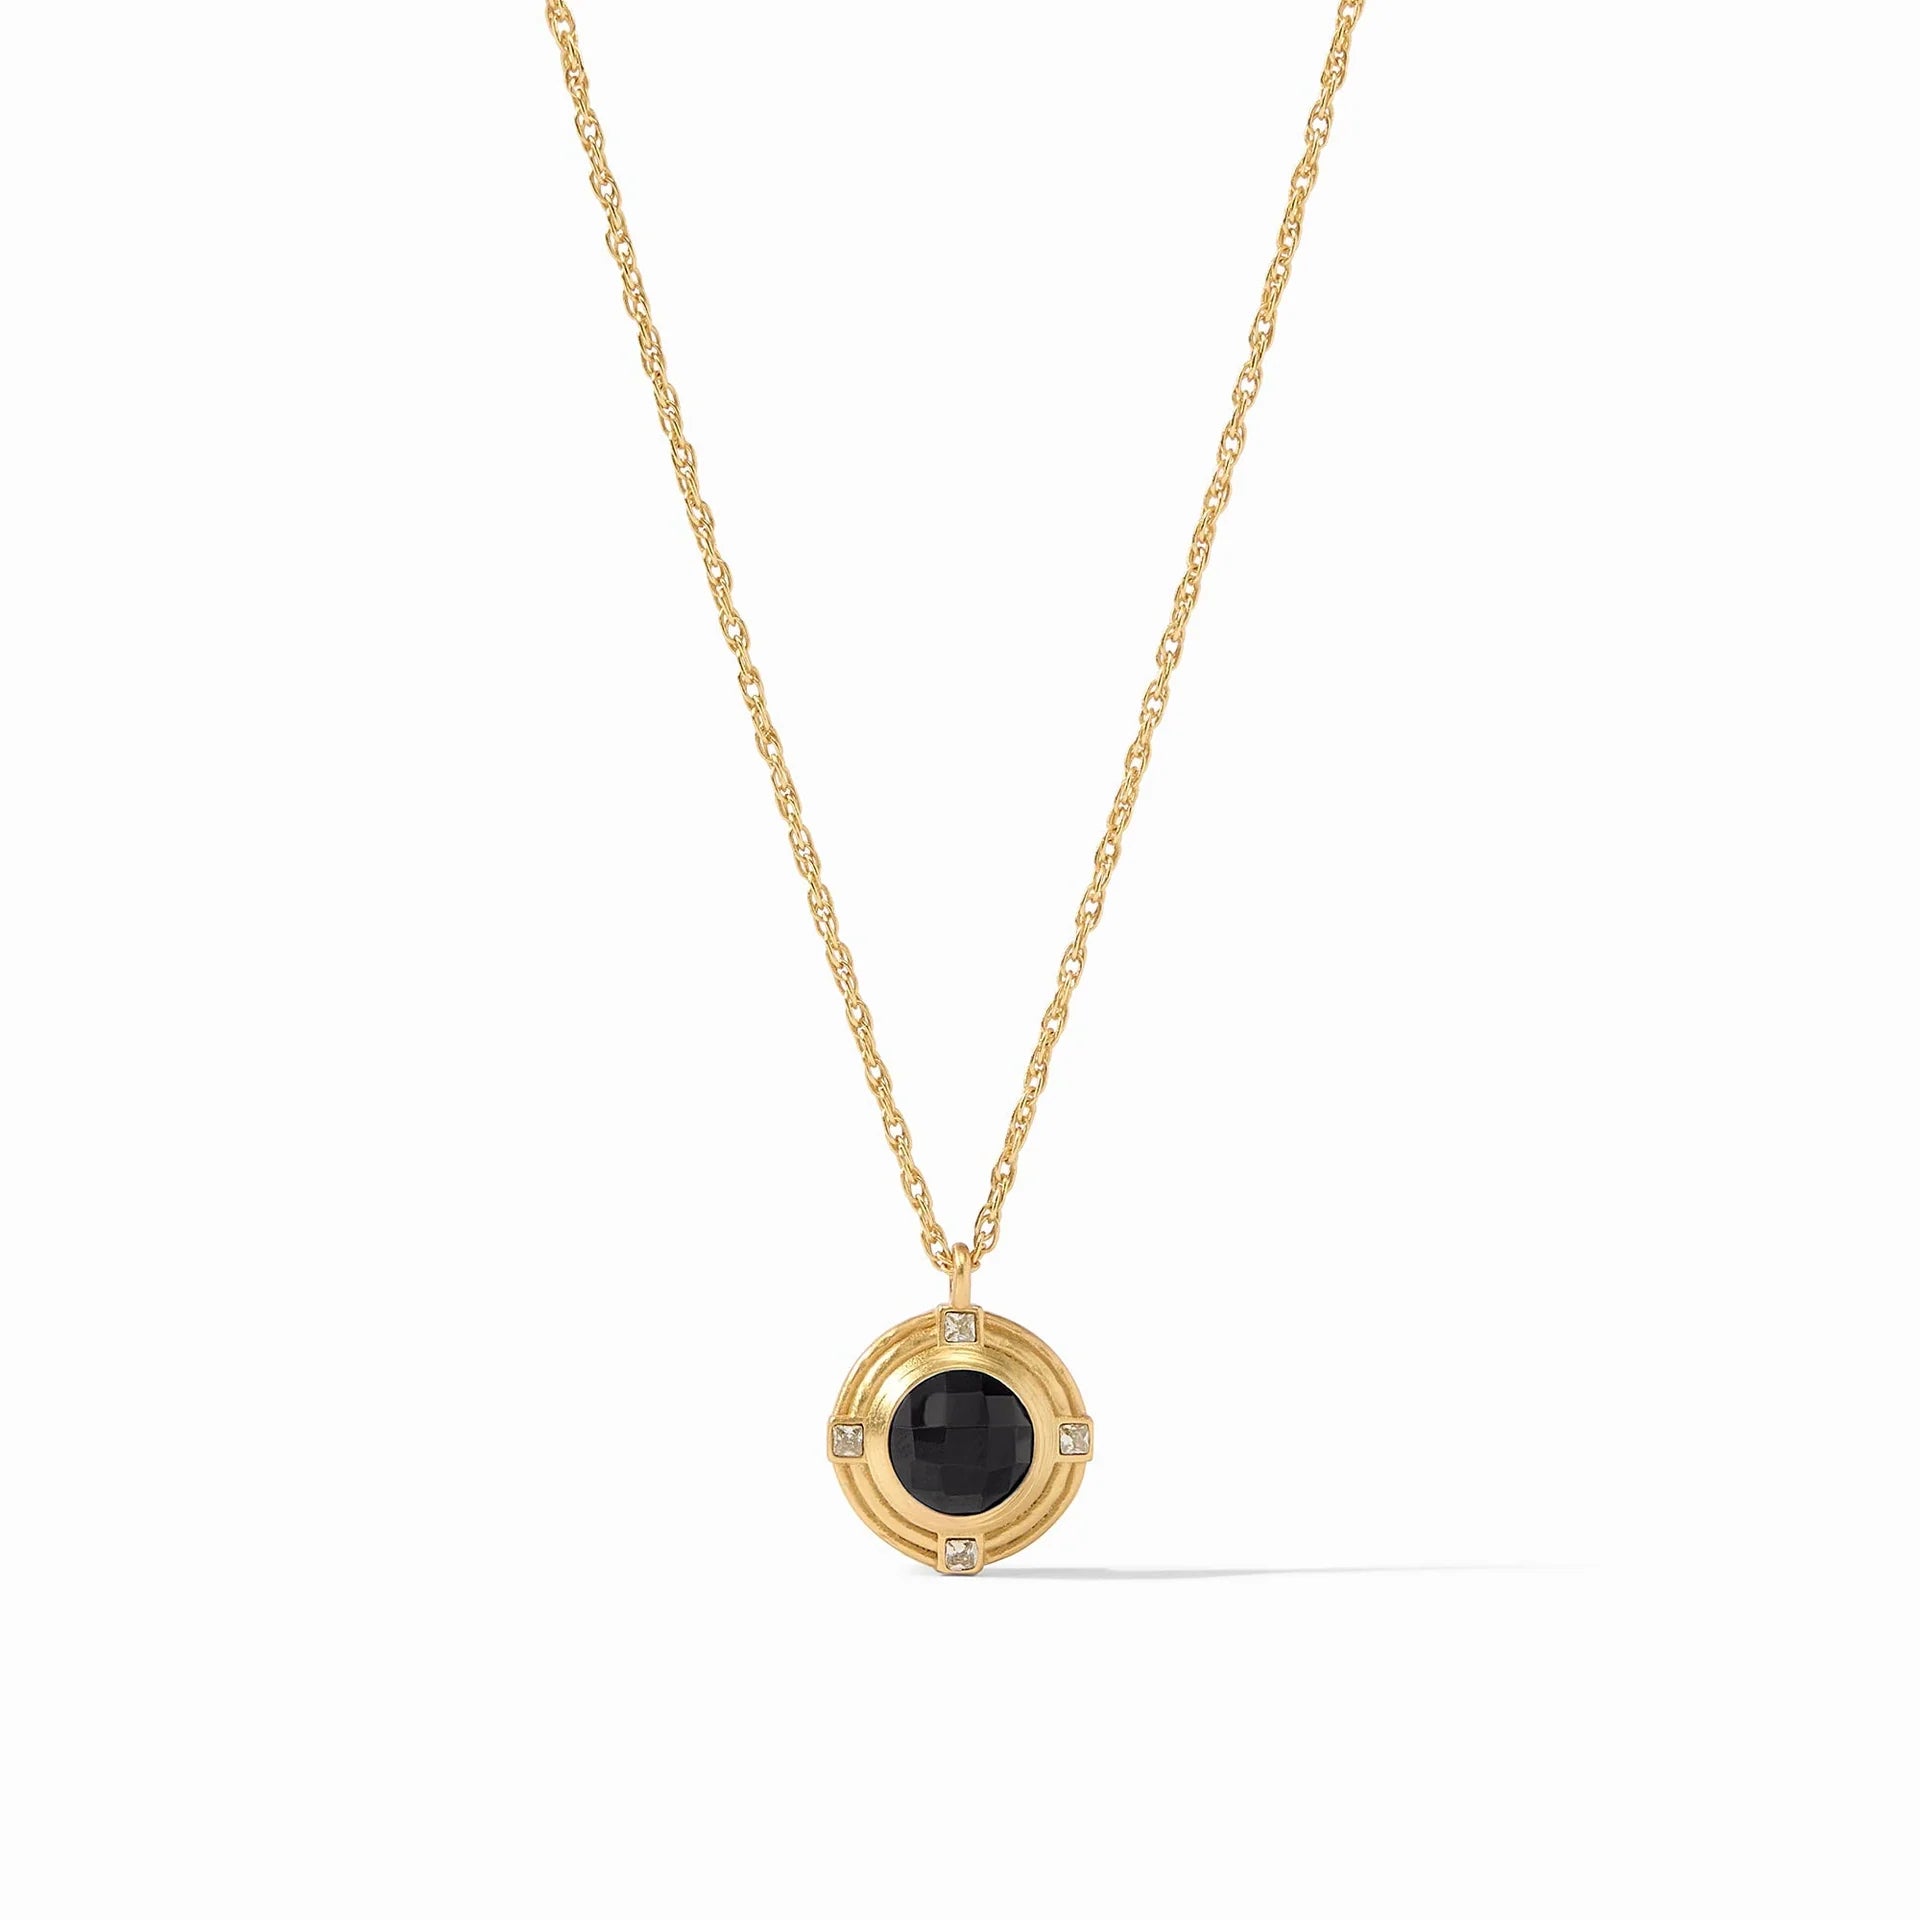 Pictured is a gold chain necklace with gold and black pendant pictured on a white background.